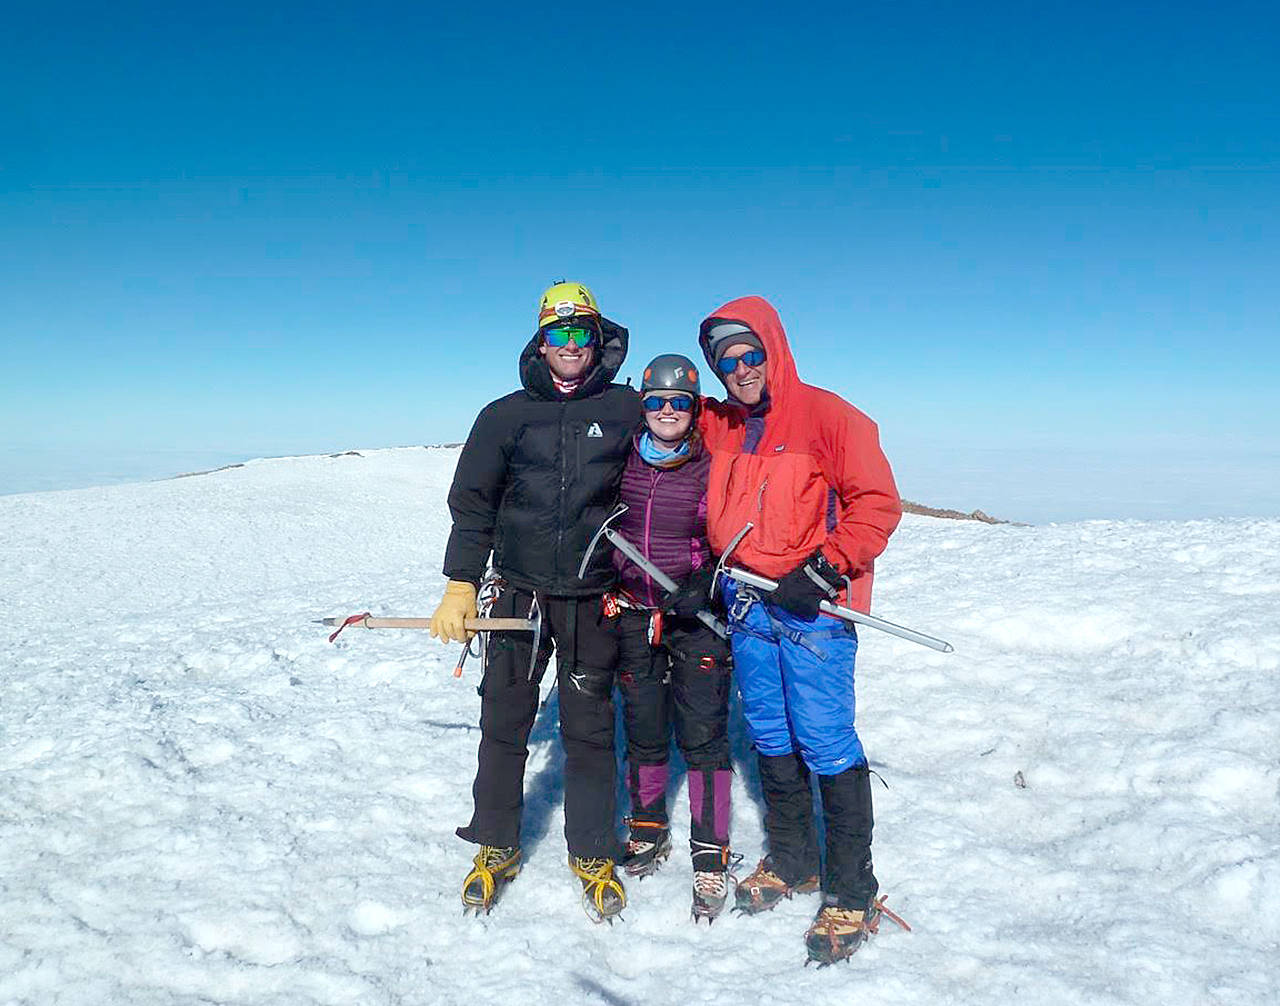 Madeline (Nolan) Read (center), her dad Mike Nolan of Port Angeles (right) and her husband Andy Read summited Mount Rainier on Sunday, July 23. Madeline is a BLANK Port Angeles High School graduate. Her great-grandmother Effie Burnard climbed the mountain in 1919. Following in my great-grandma’s footsteps and summiting Mt. Rainier has been on my ‘Bucket List’ for quite a while.